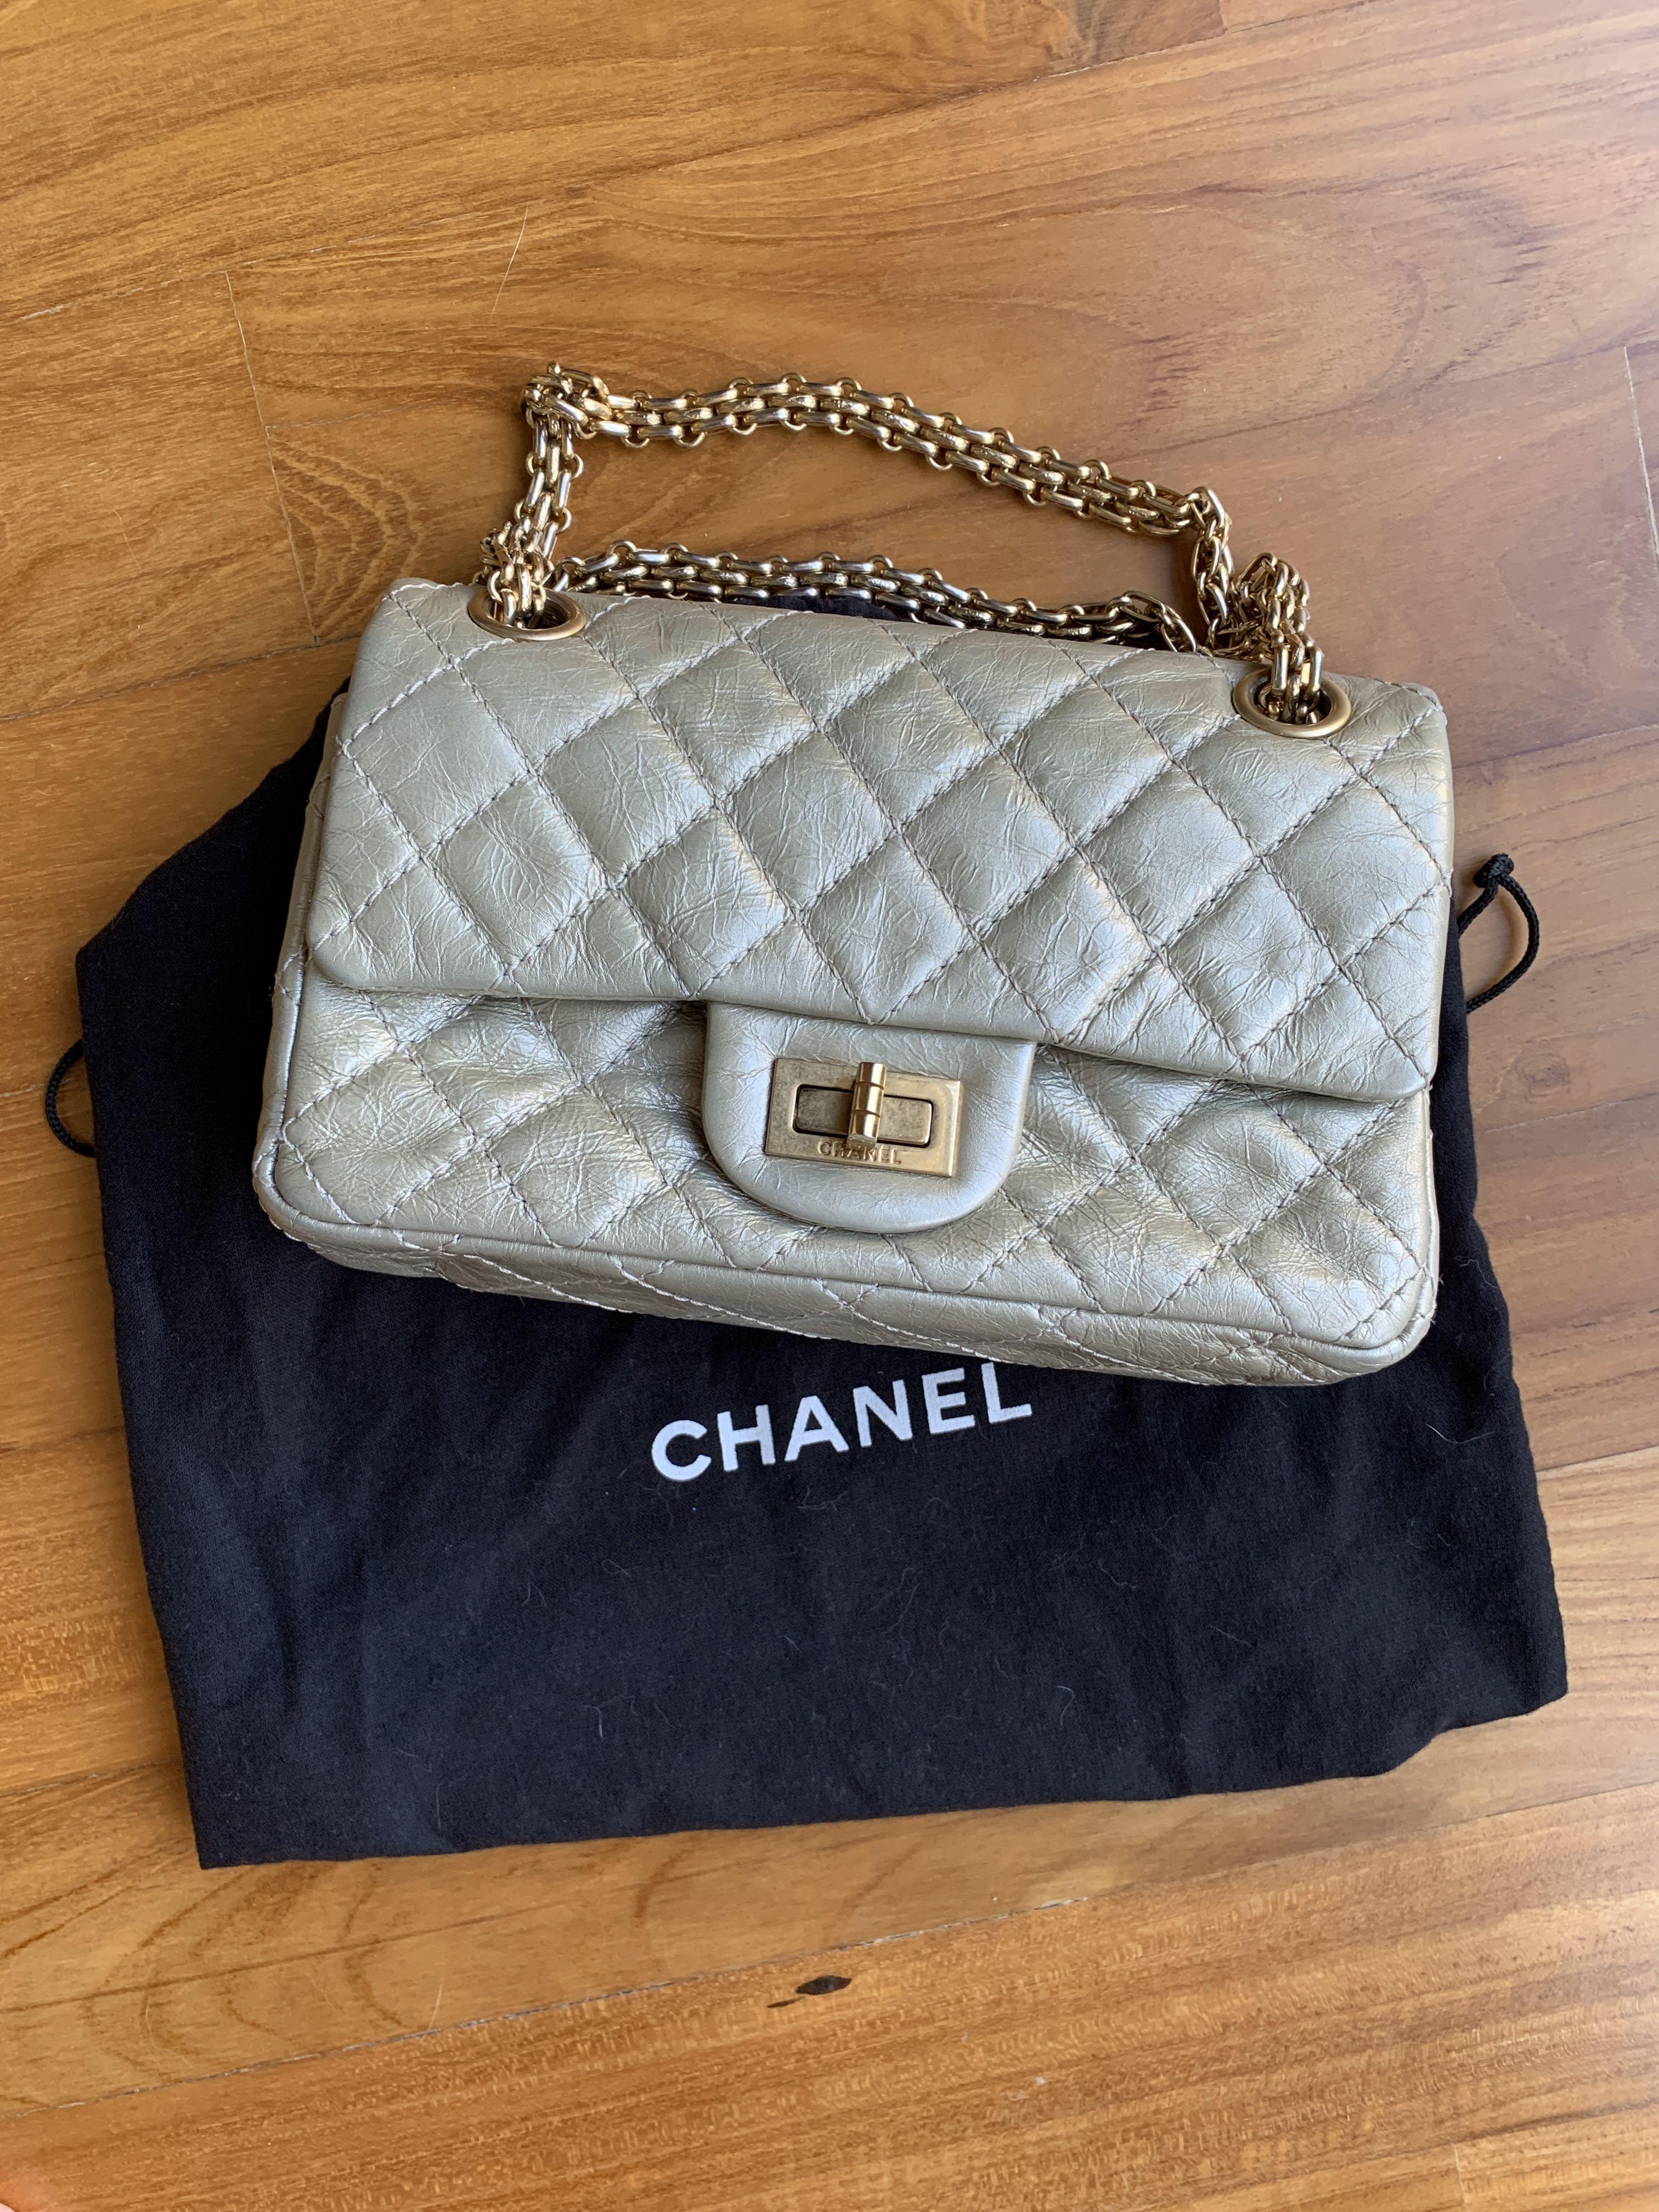 CHANEL Aged Calfskin Lucky Charms 2.55 Reissue 224 Flap Black 679225